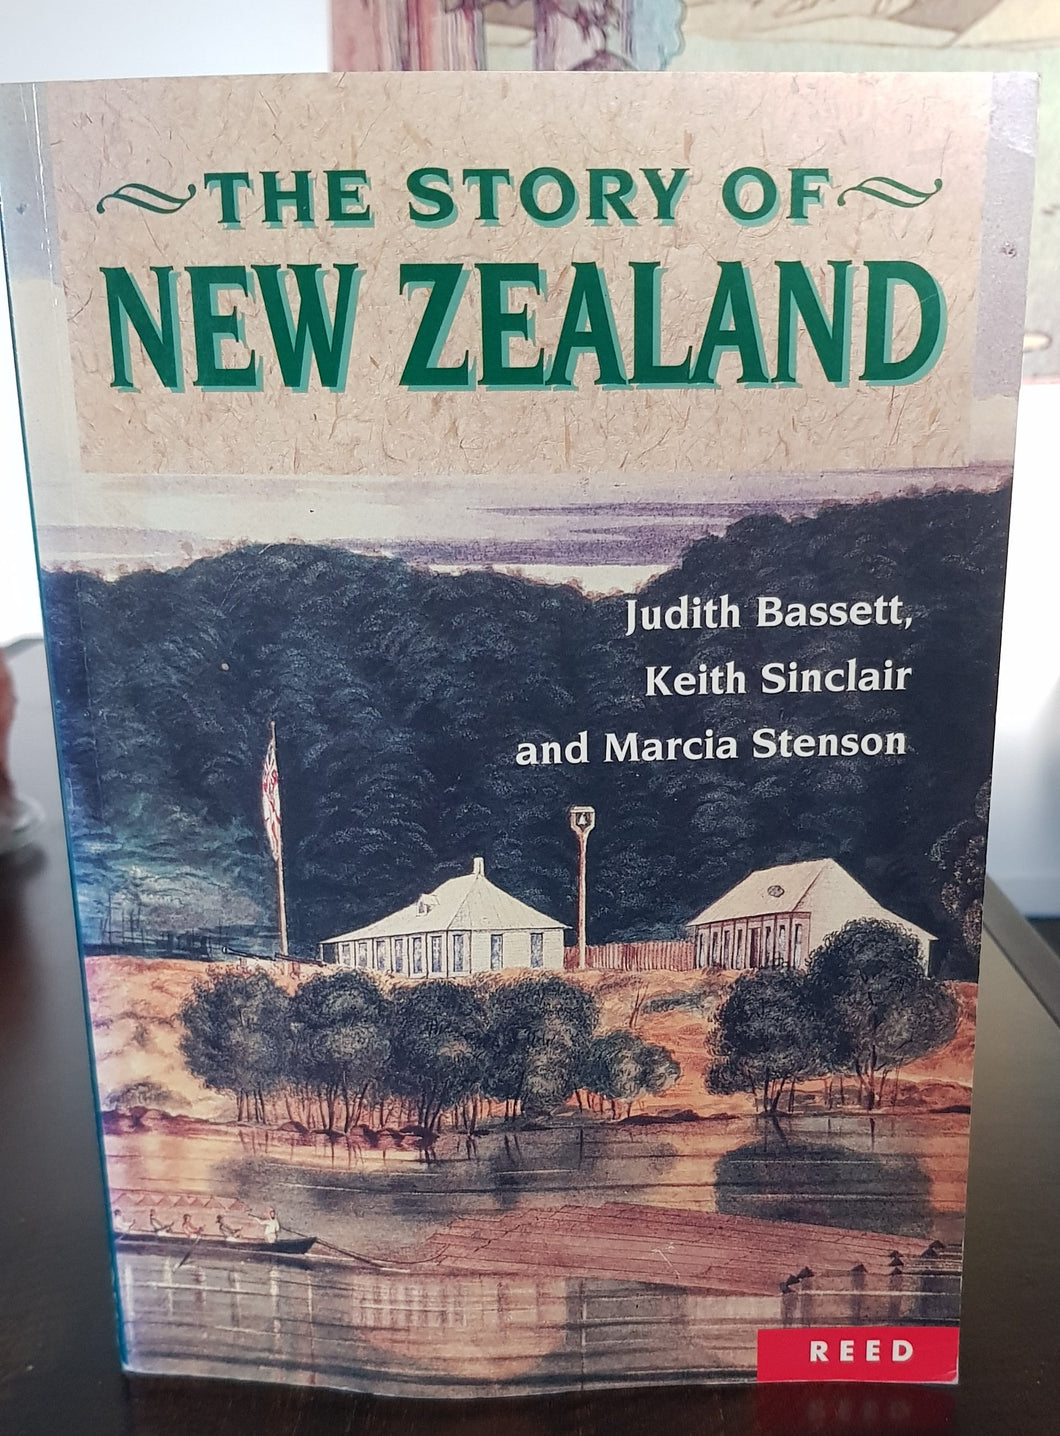 The Story of New Zealand by Judith Bassett, Keith Sinclair, Marcia Stenson